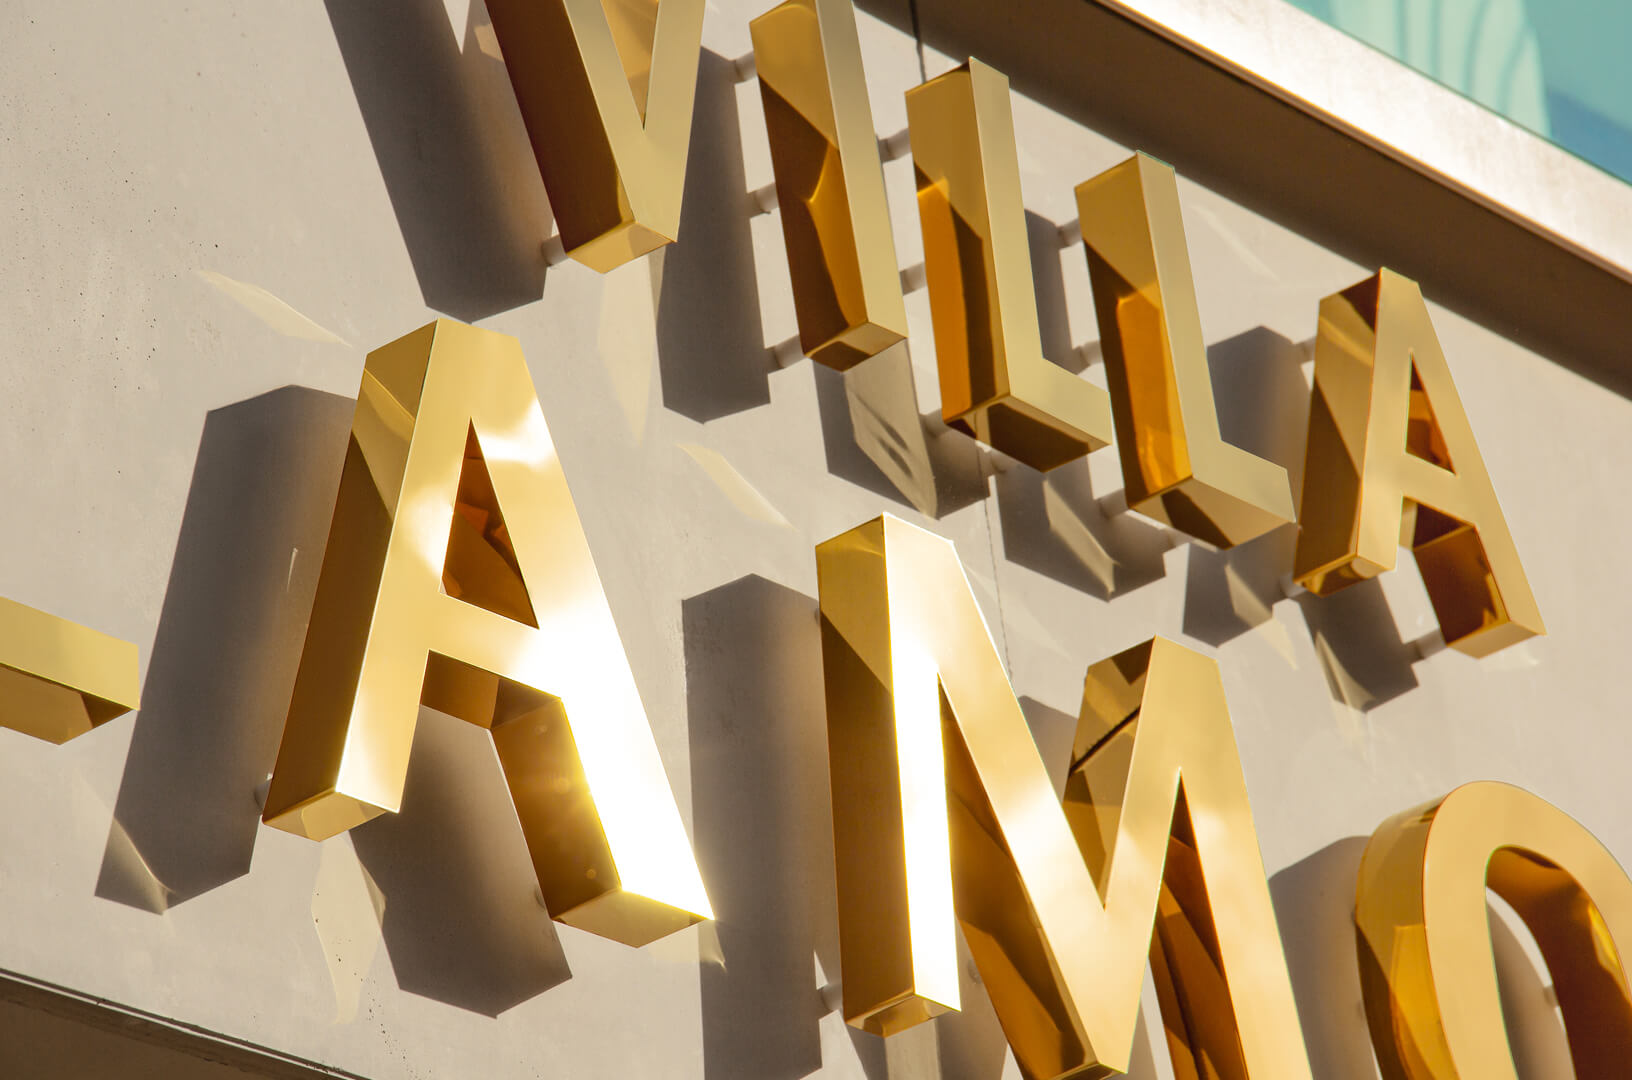 Villa Glamour - letters made of gold polished stainless steel, back-lit on the wall